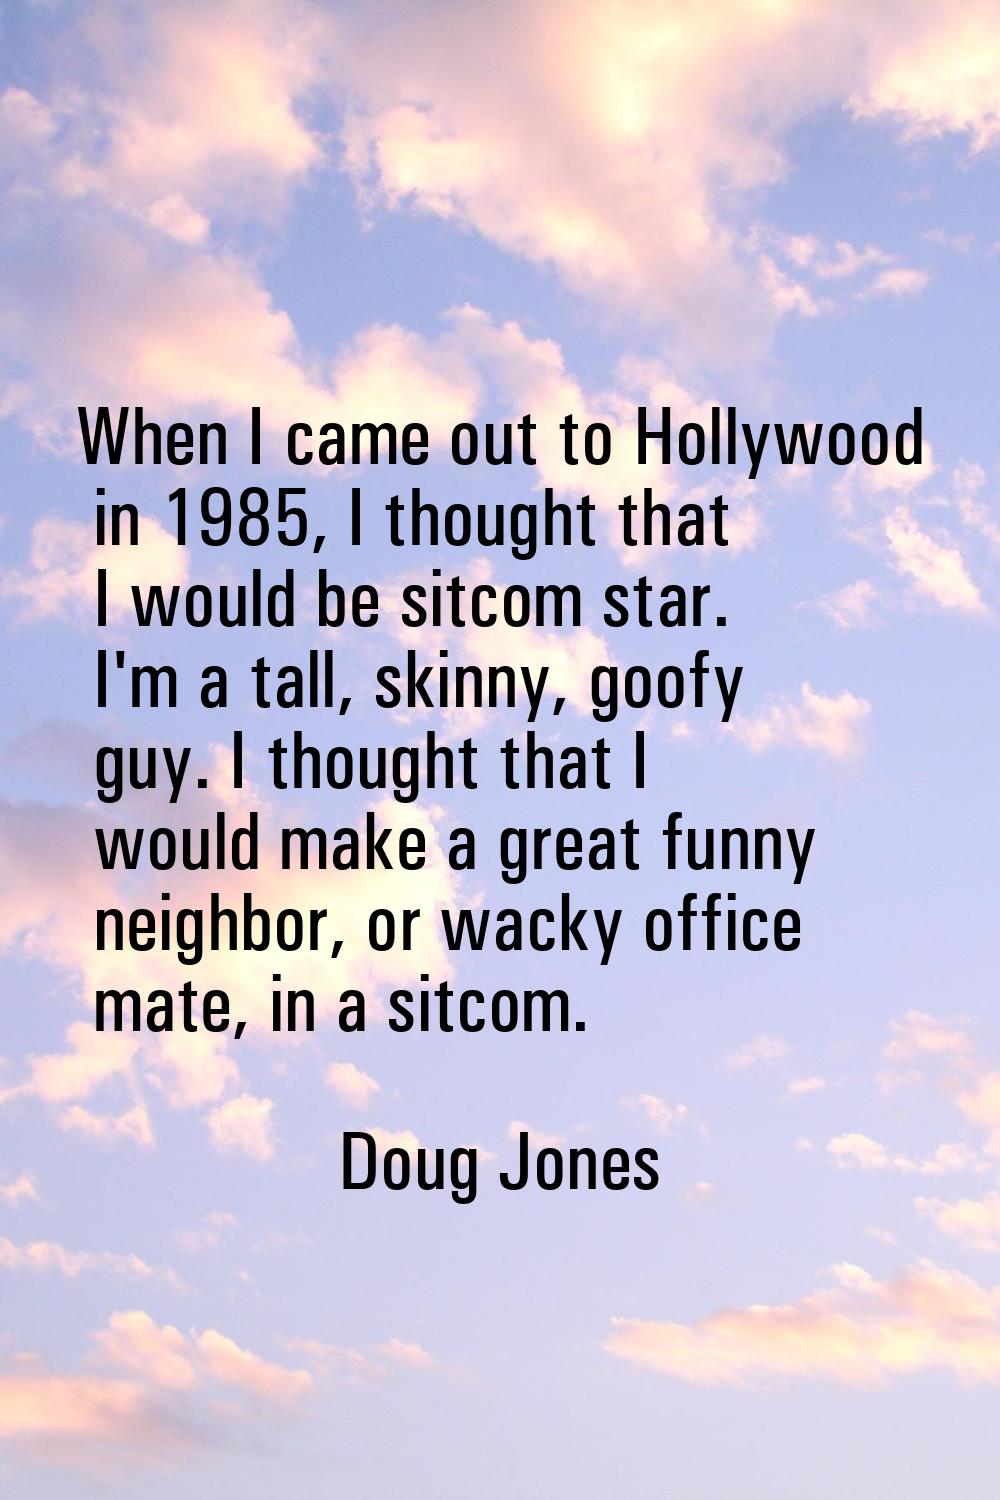 When I came out to Hollywood in 1985, I thought that I would be sitcom star. I'm a tall, skinny, go